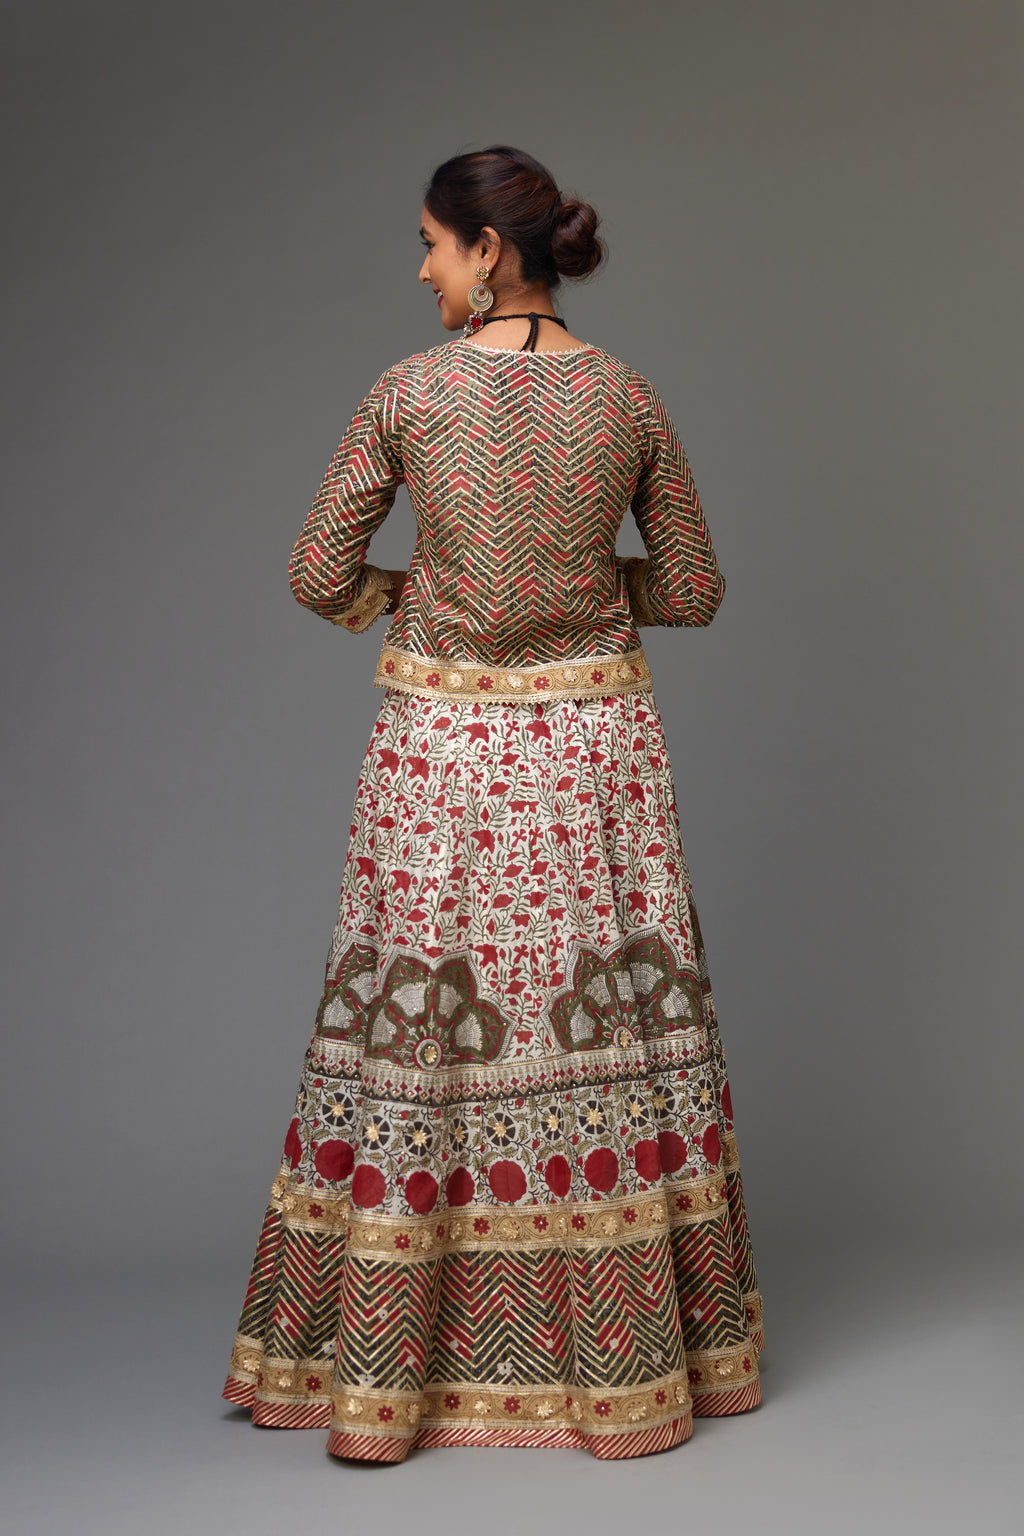 Silk chanderi hand block printed lehenga with herringbone gota embroidery at hem, along with a half 'thaal' design at the kalis, highlighted with gota flowers and gold sequins.